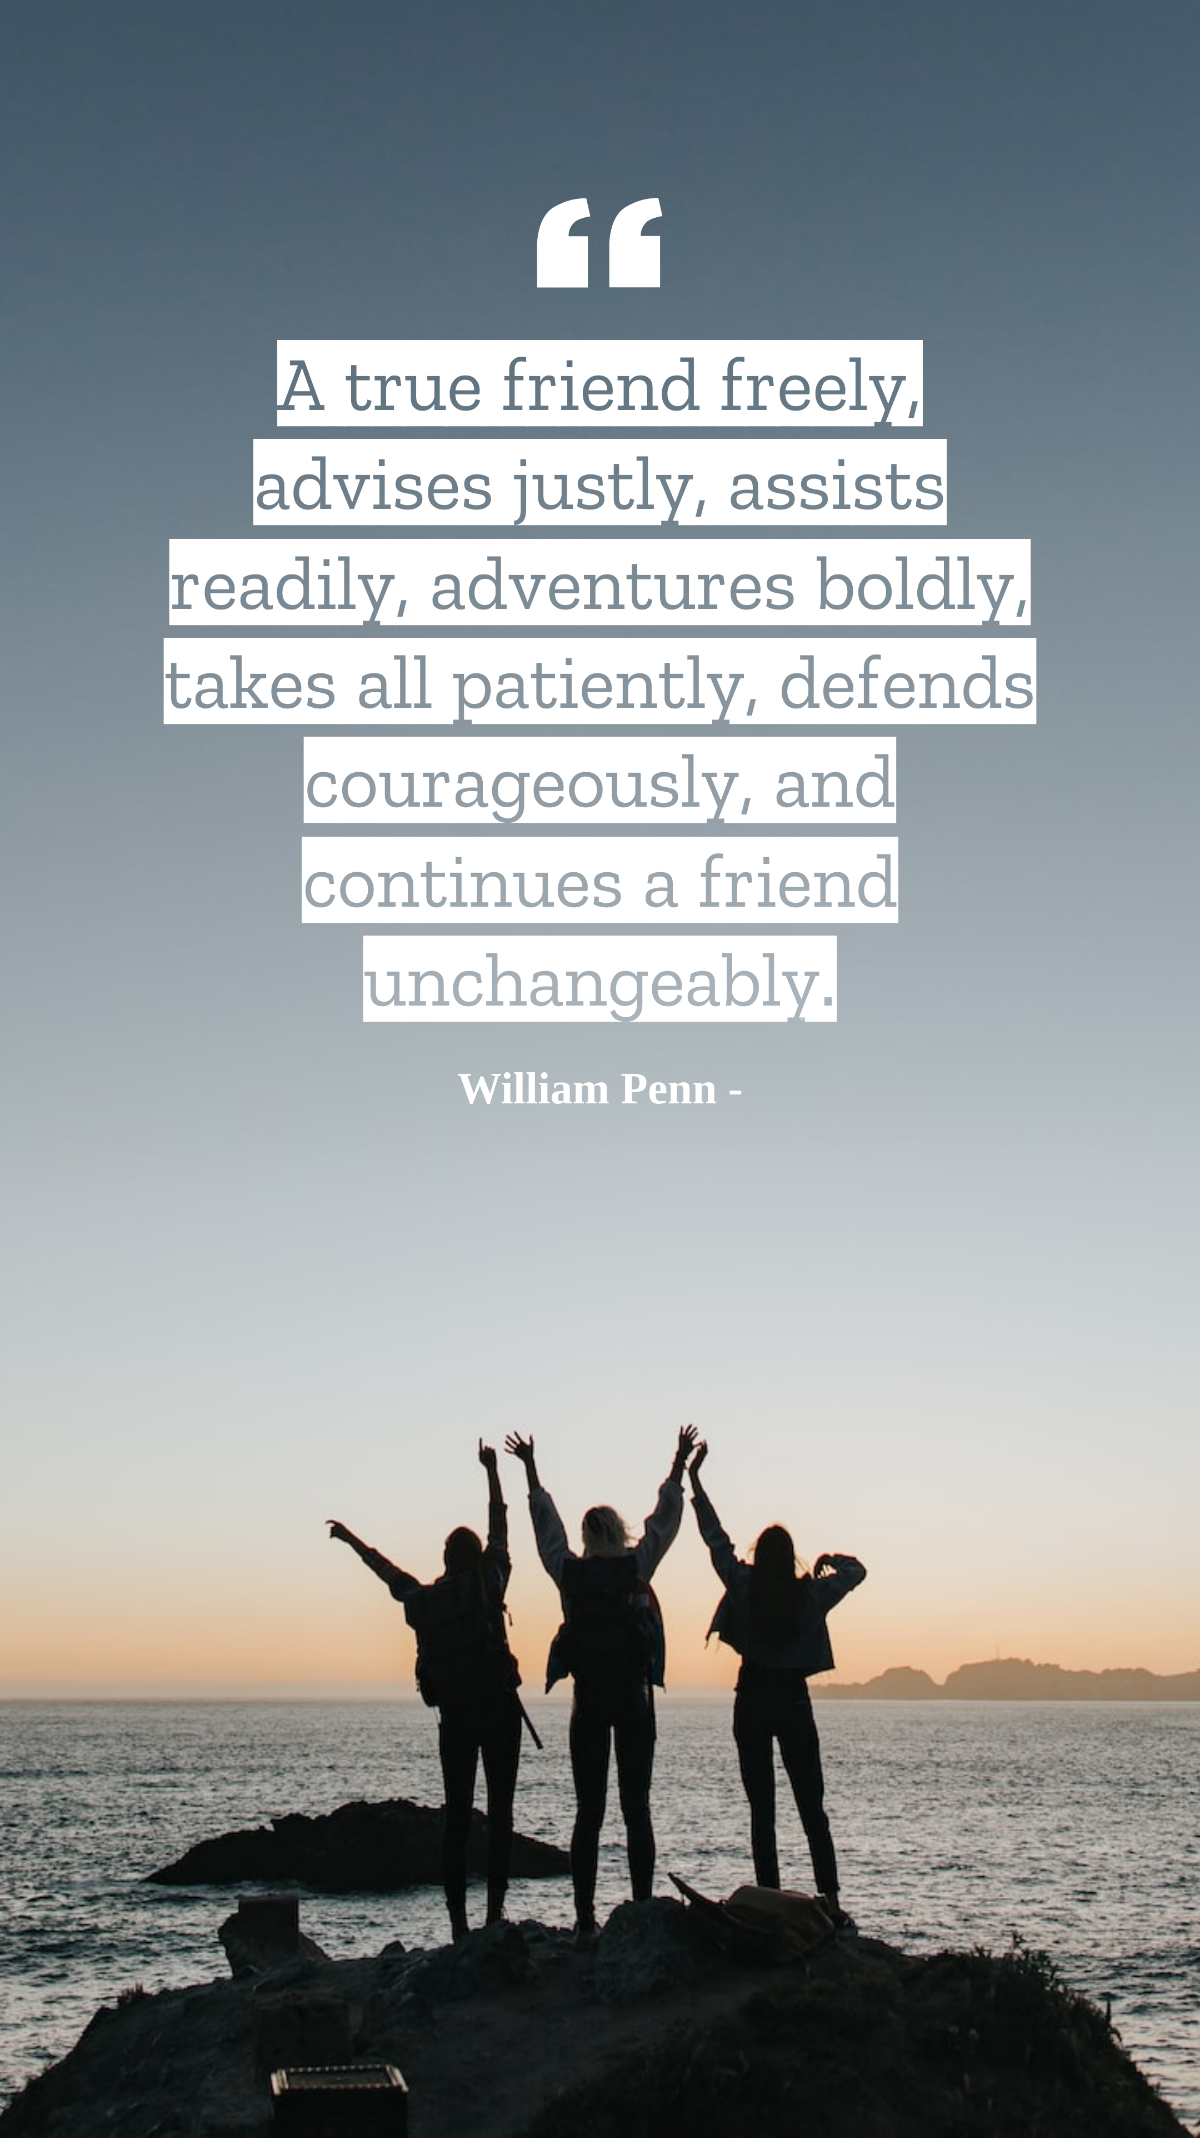 William Penn - A true friend freely, advises justly, assists readily, adventures boldly, takes all patiently, defends courageously, and continues a friend unchangeably. Template